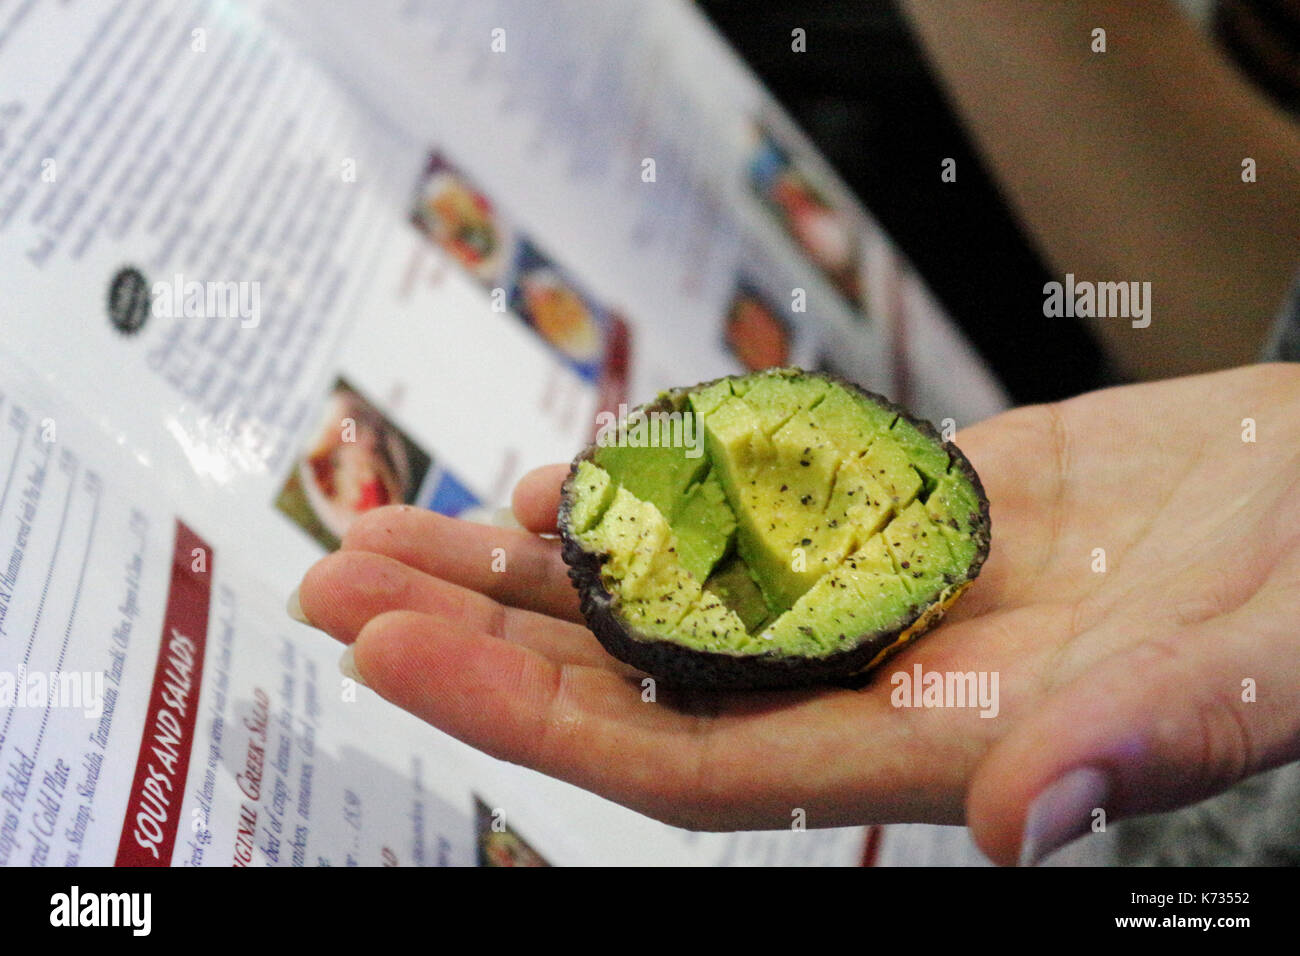 A sliced avocado sitting on a hand ready to eat with a restaurant menu in the background. Stock Photo